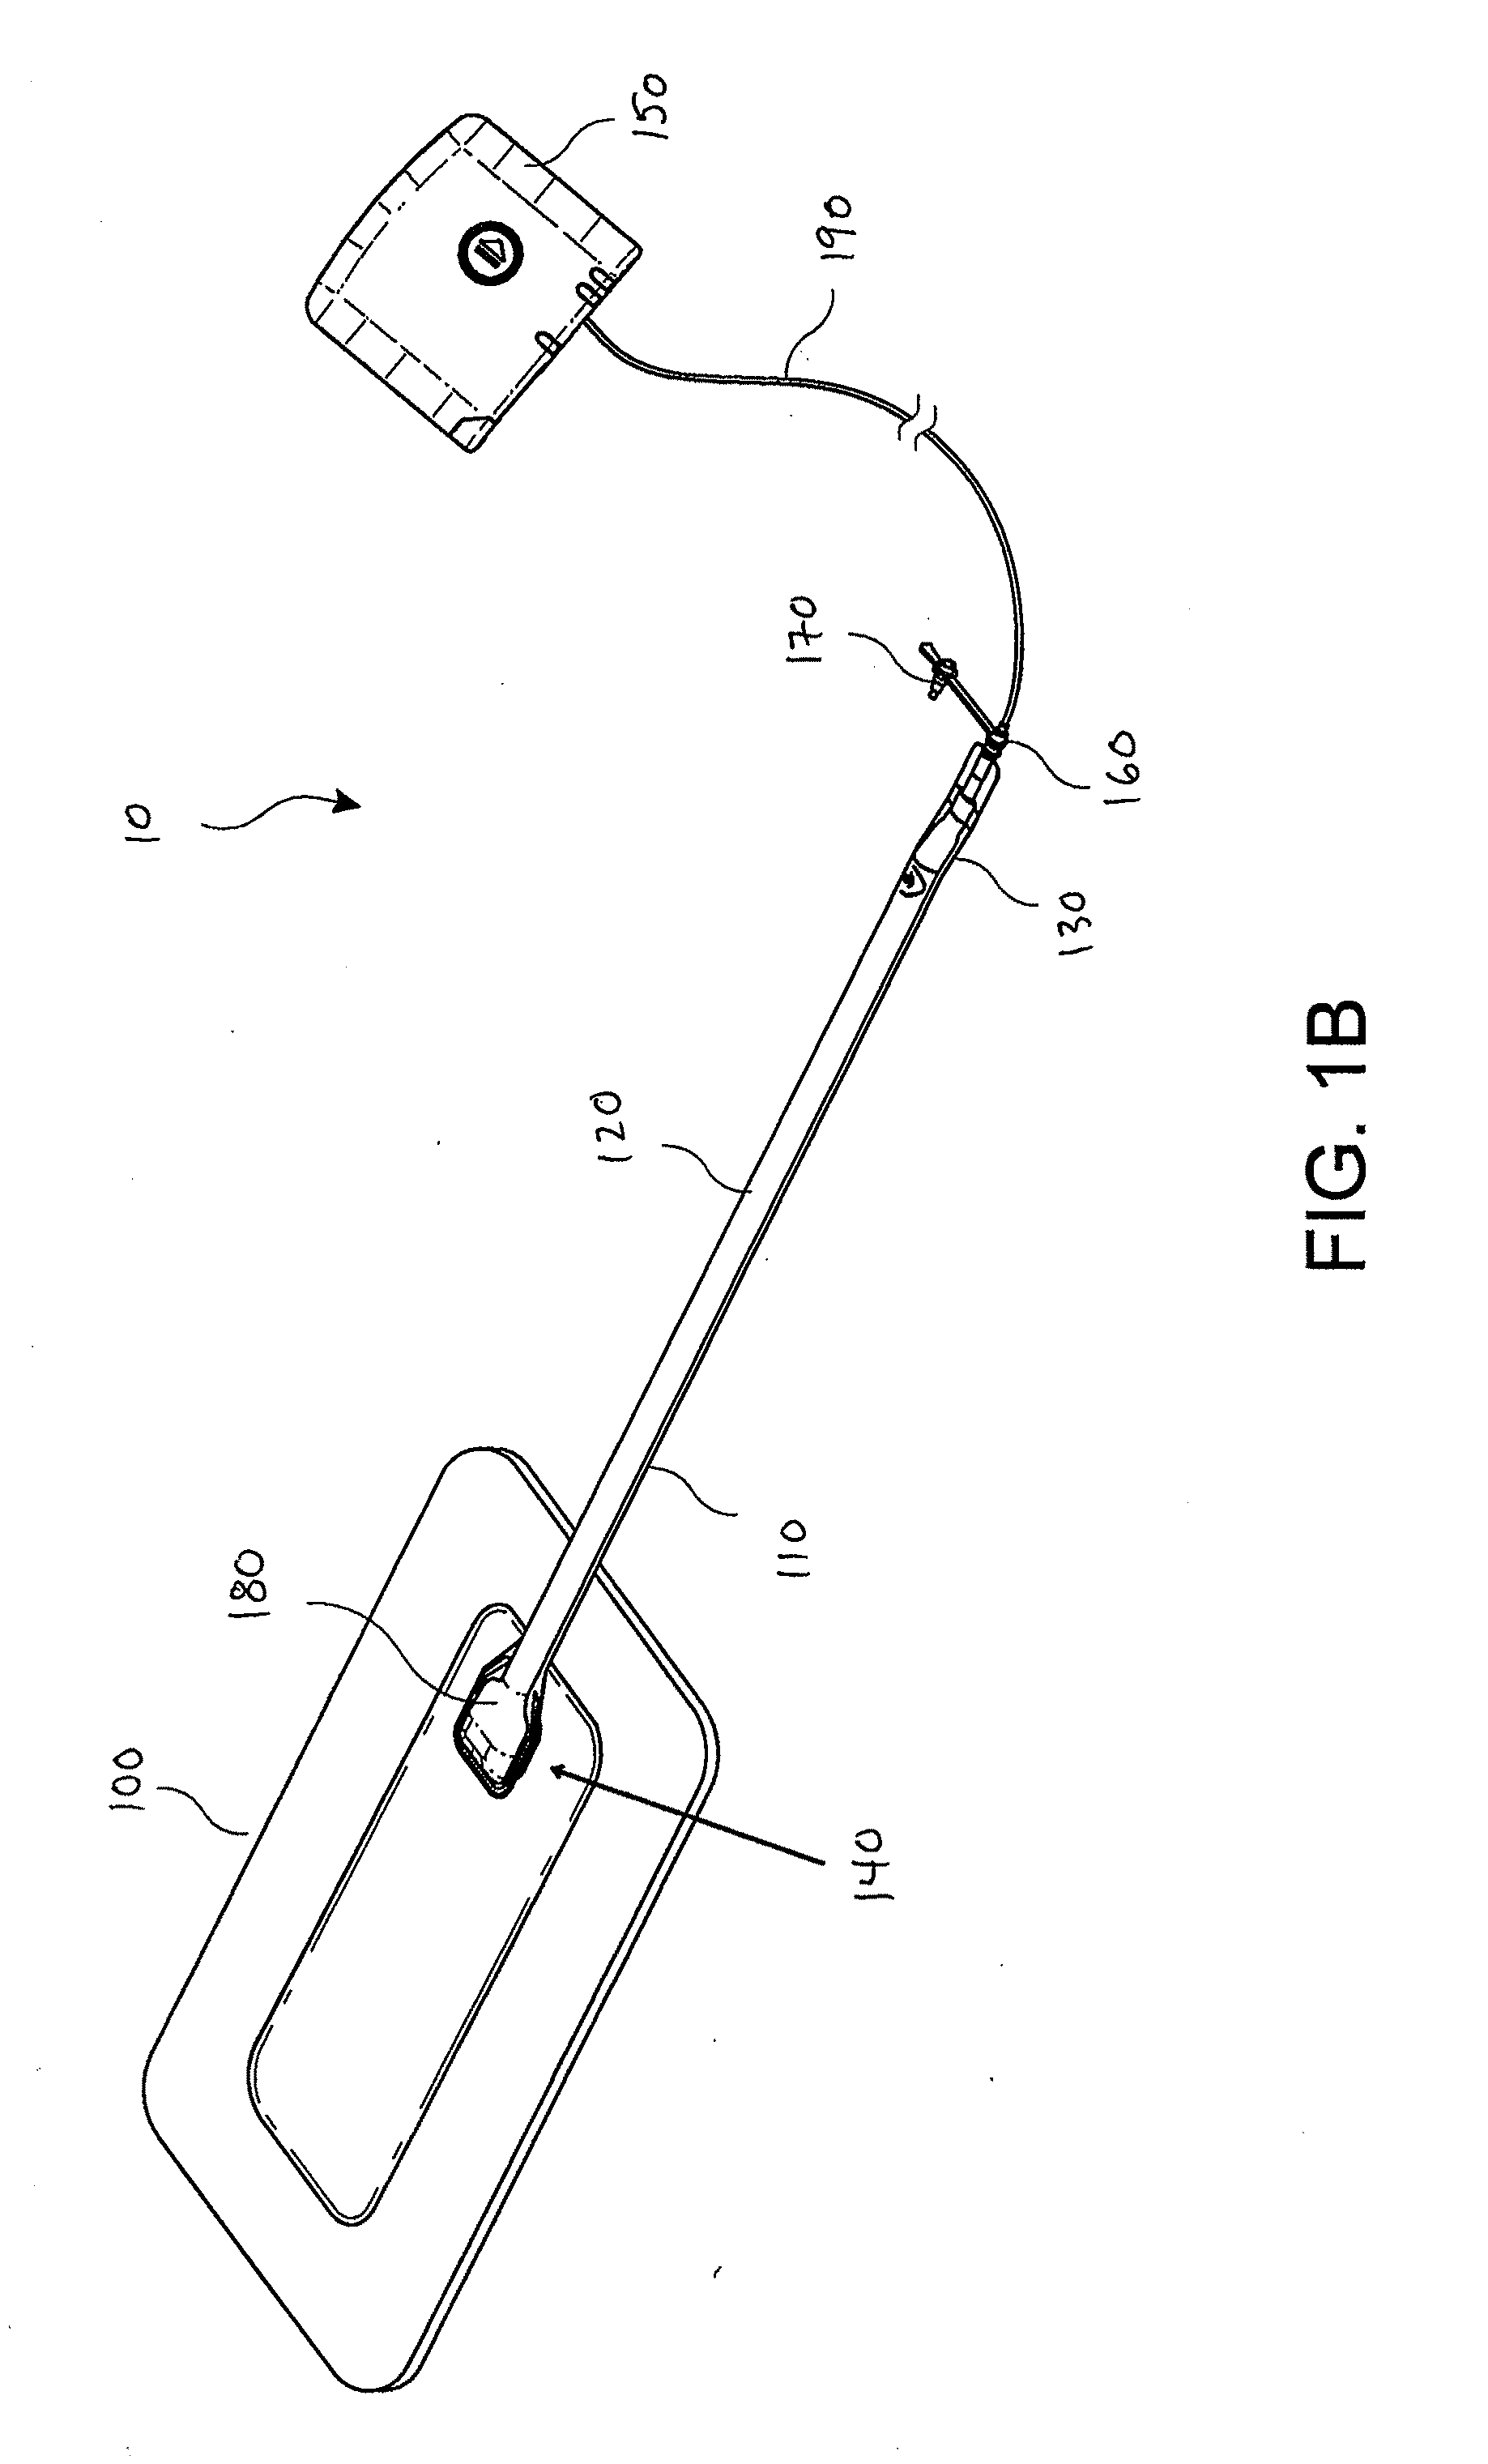 Fluidic connector for negative pressure wound therapy